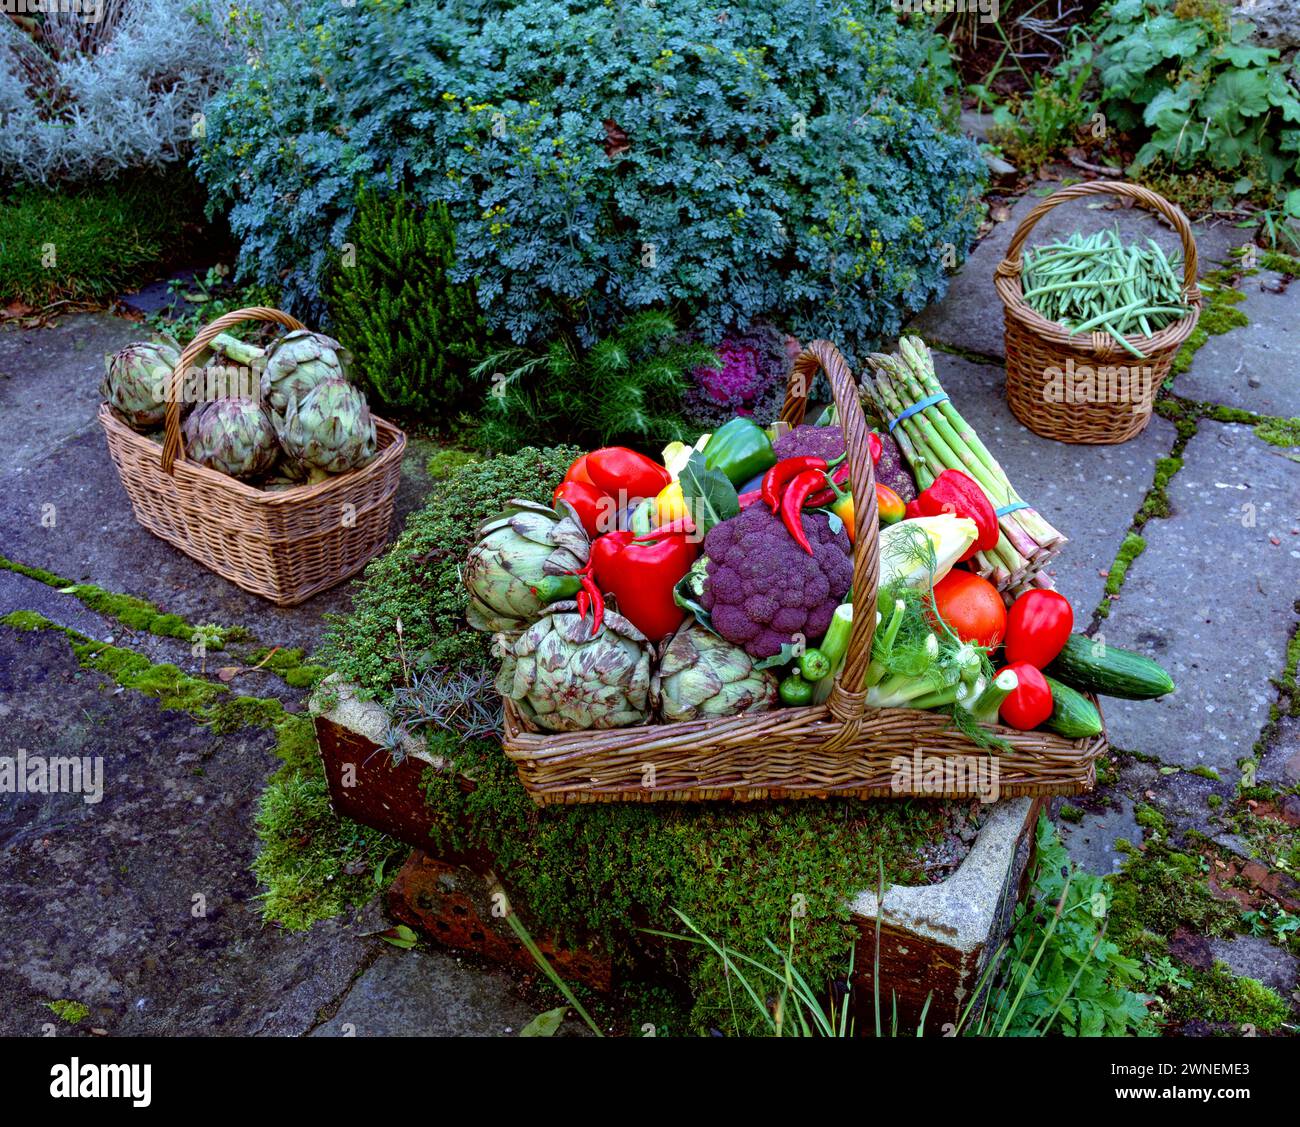 Baskets of freshlly picked garden vegetables, in a kitchen garden setting Stock Photo